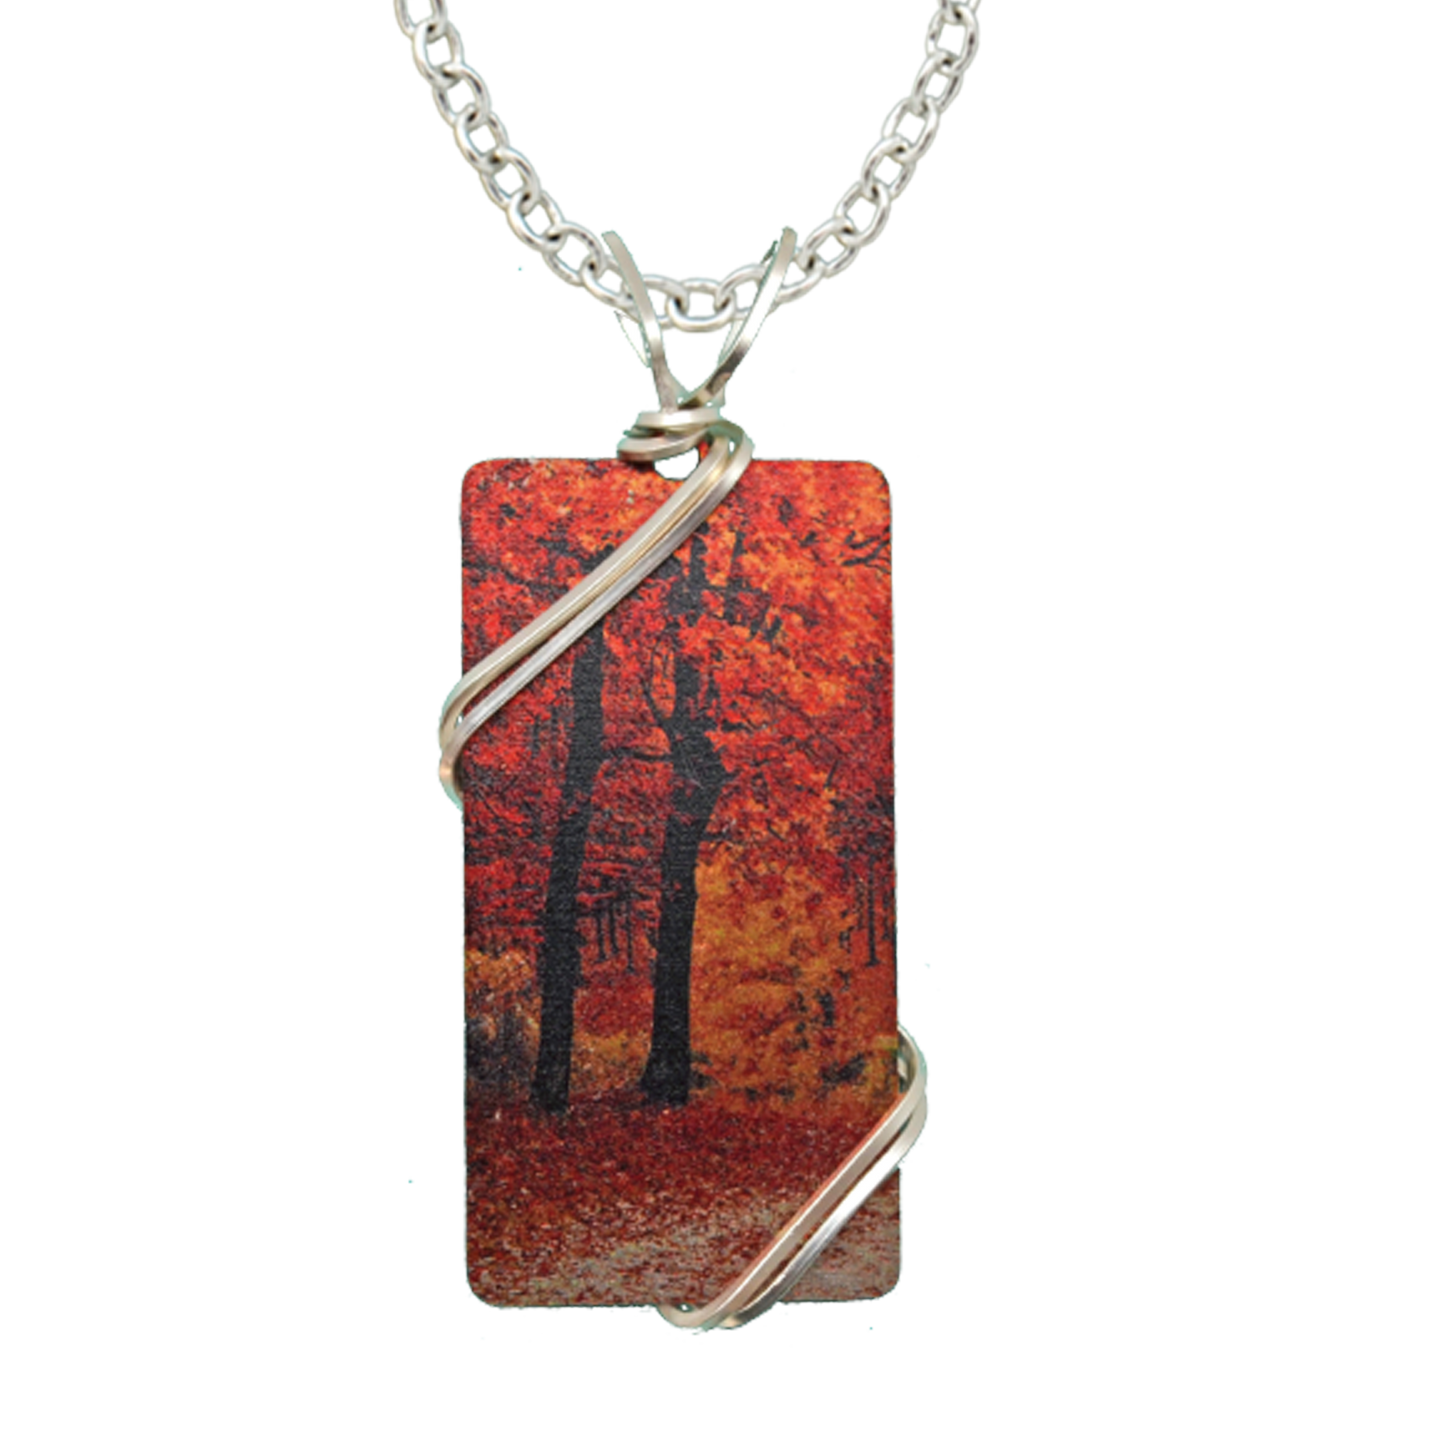 Fall Leaves Necklace, 1.5" pendant with silver-plated wiring